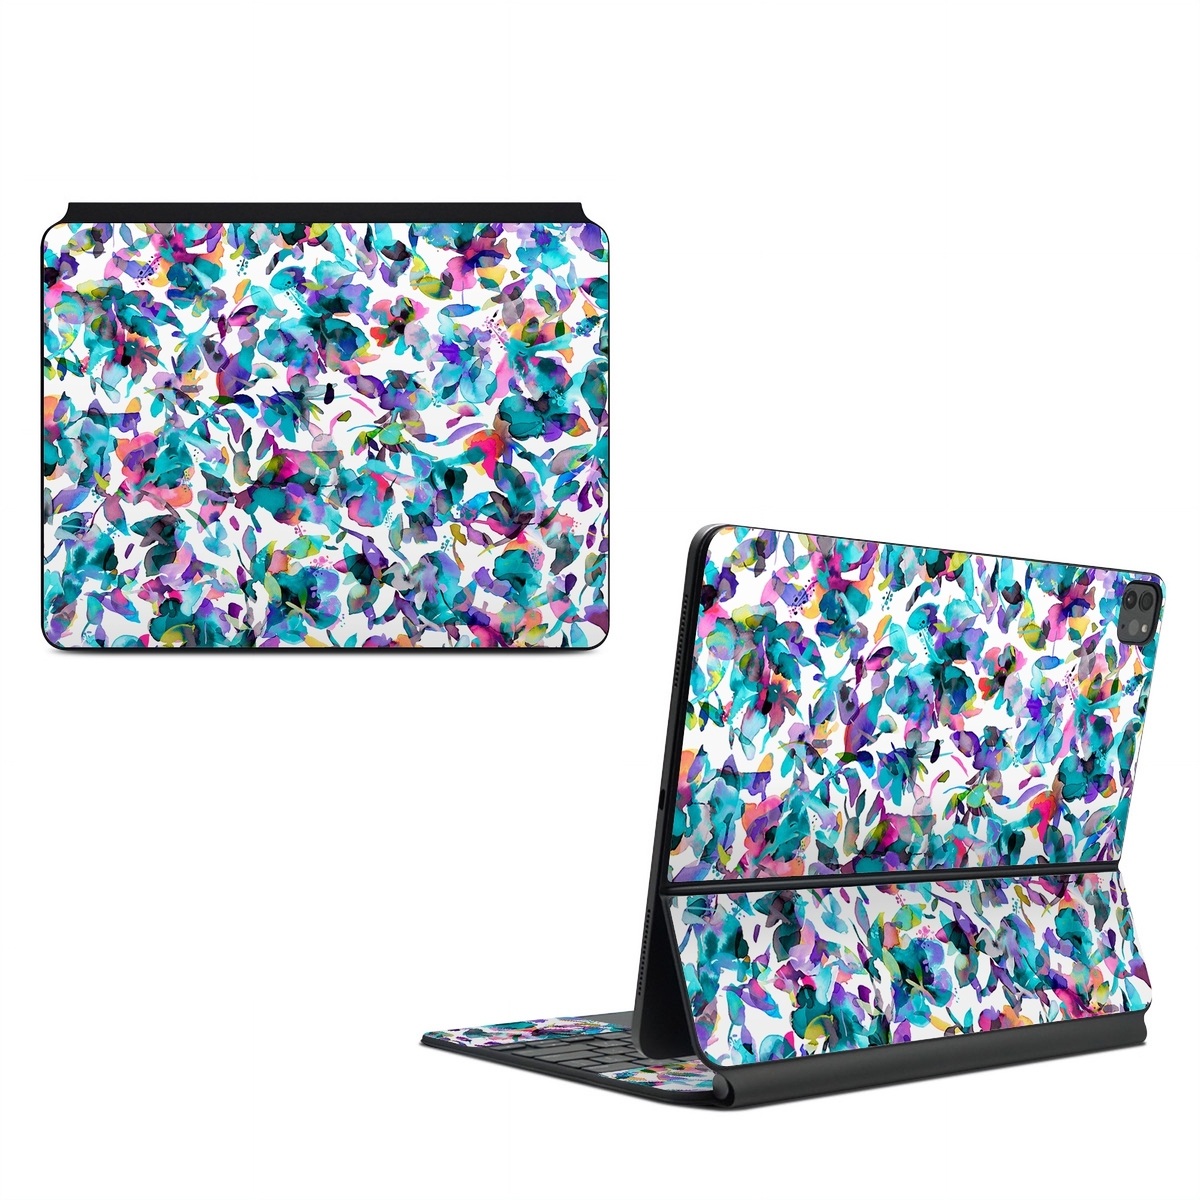 Magic Keyboard for iPad Series Skin design of Pattern, Design, Textile, with white, blue, red, purple, pink, orange, yellow colors